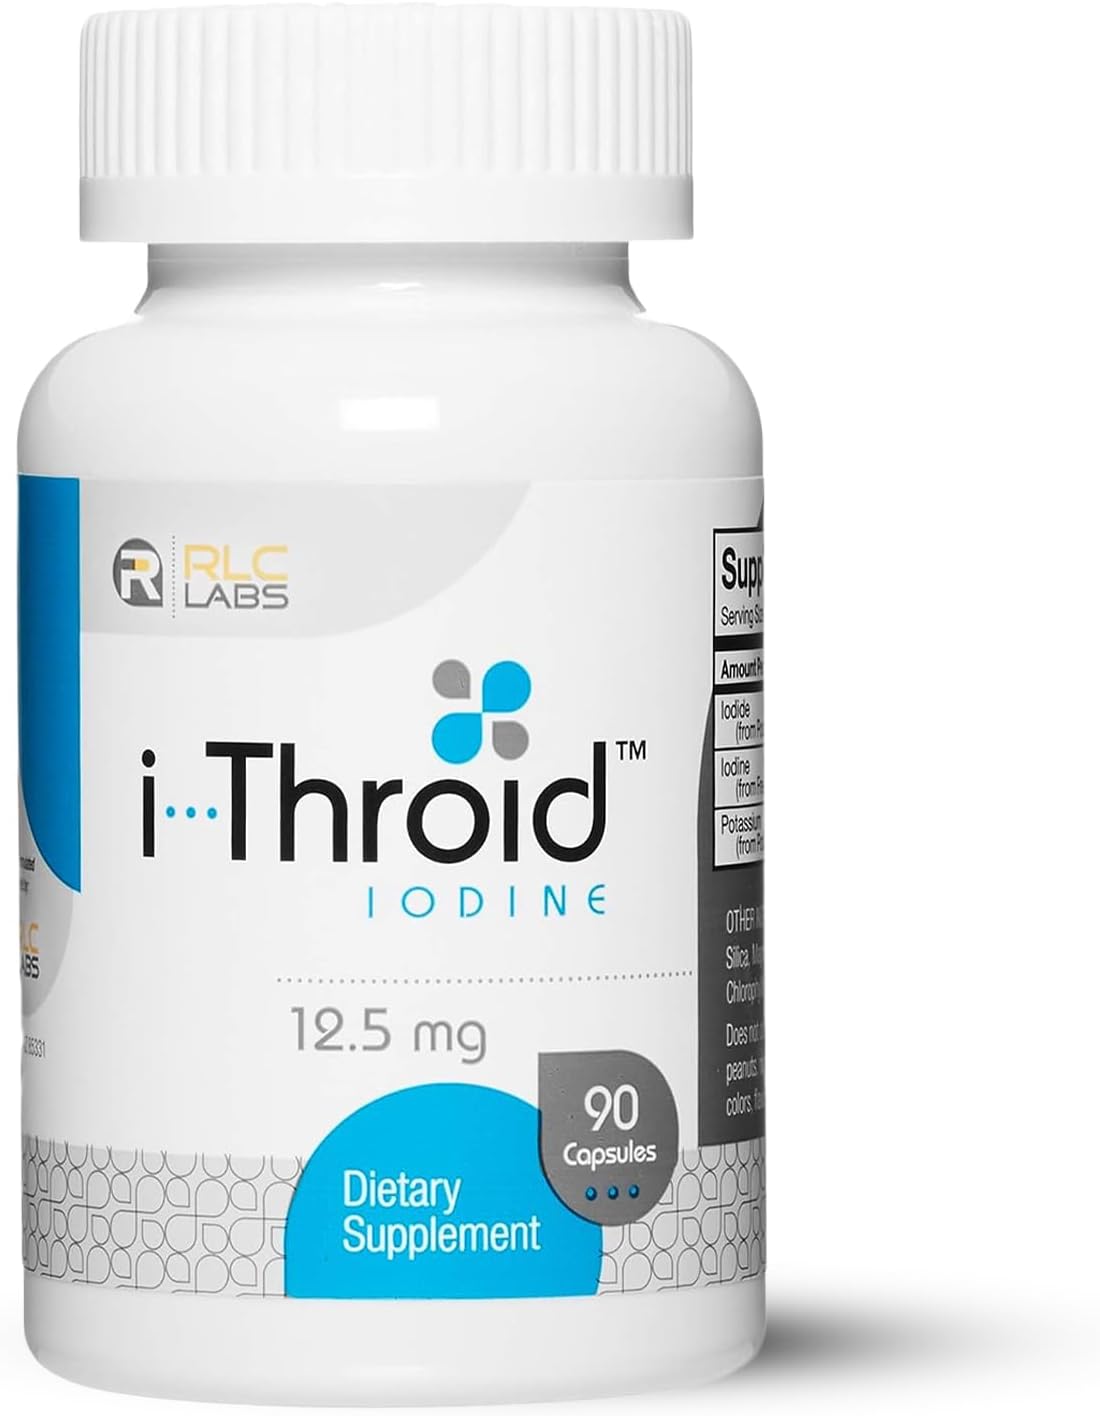 RLC, i-Throid 12.5 mg, Iodine and Iodide Supplement to Support Thyroid Health and Hormone Balance, 9